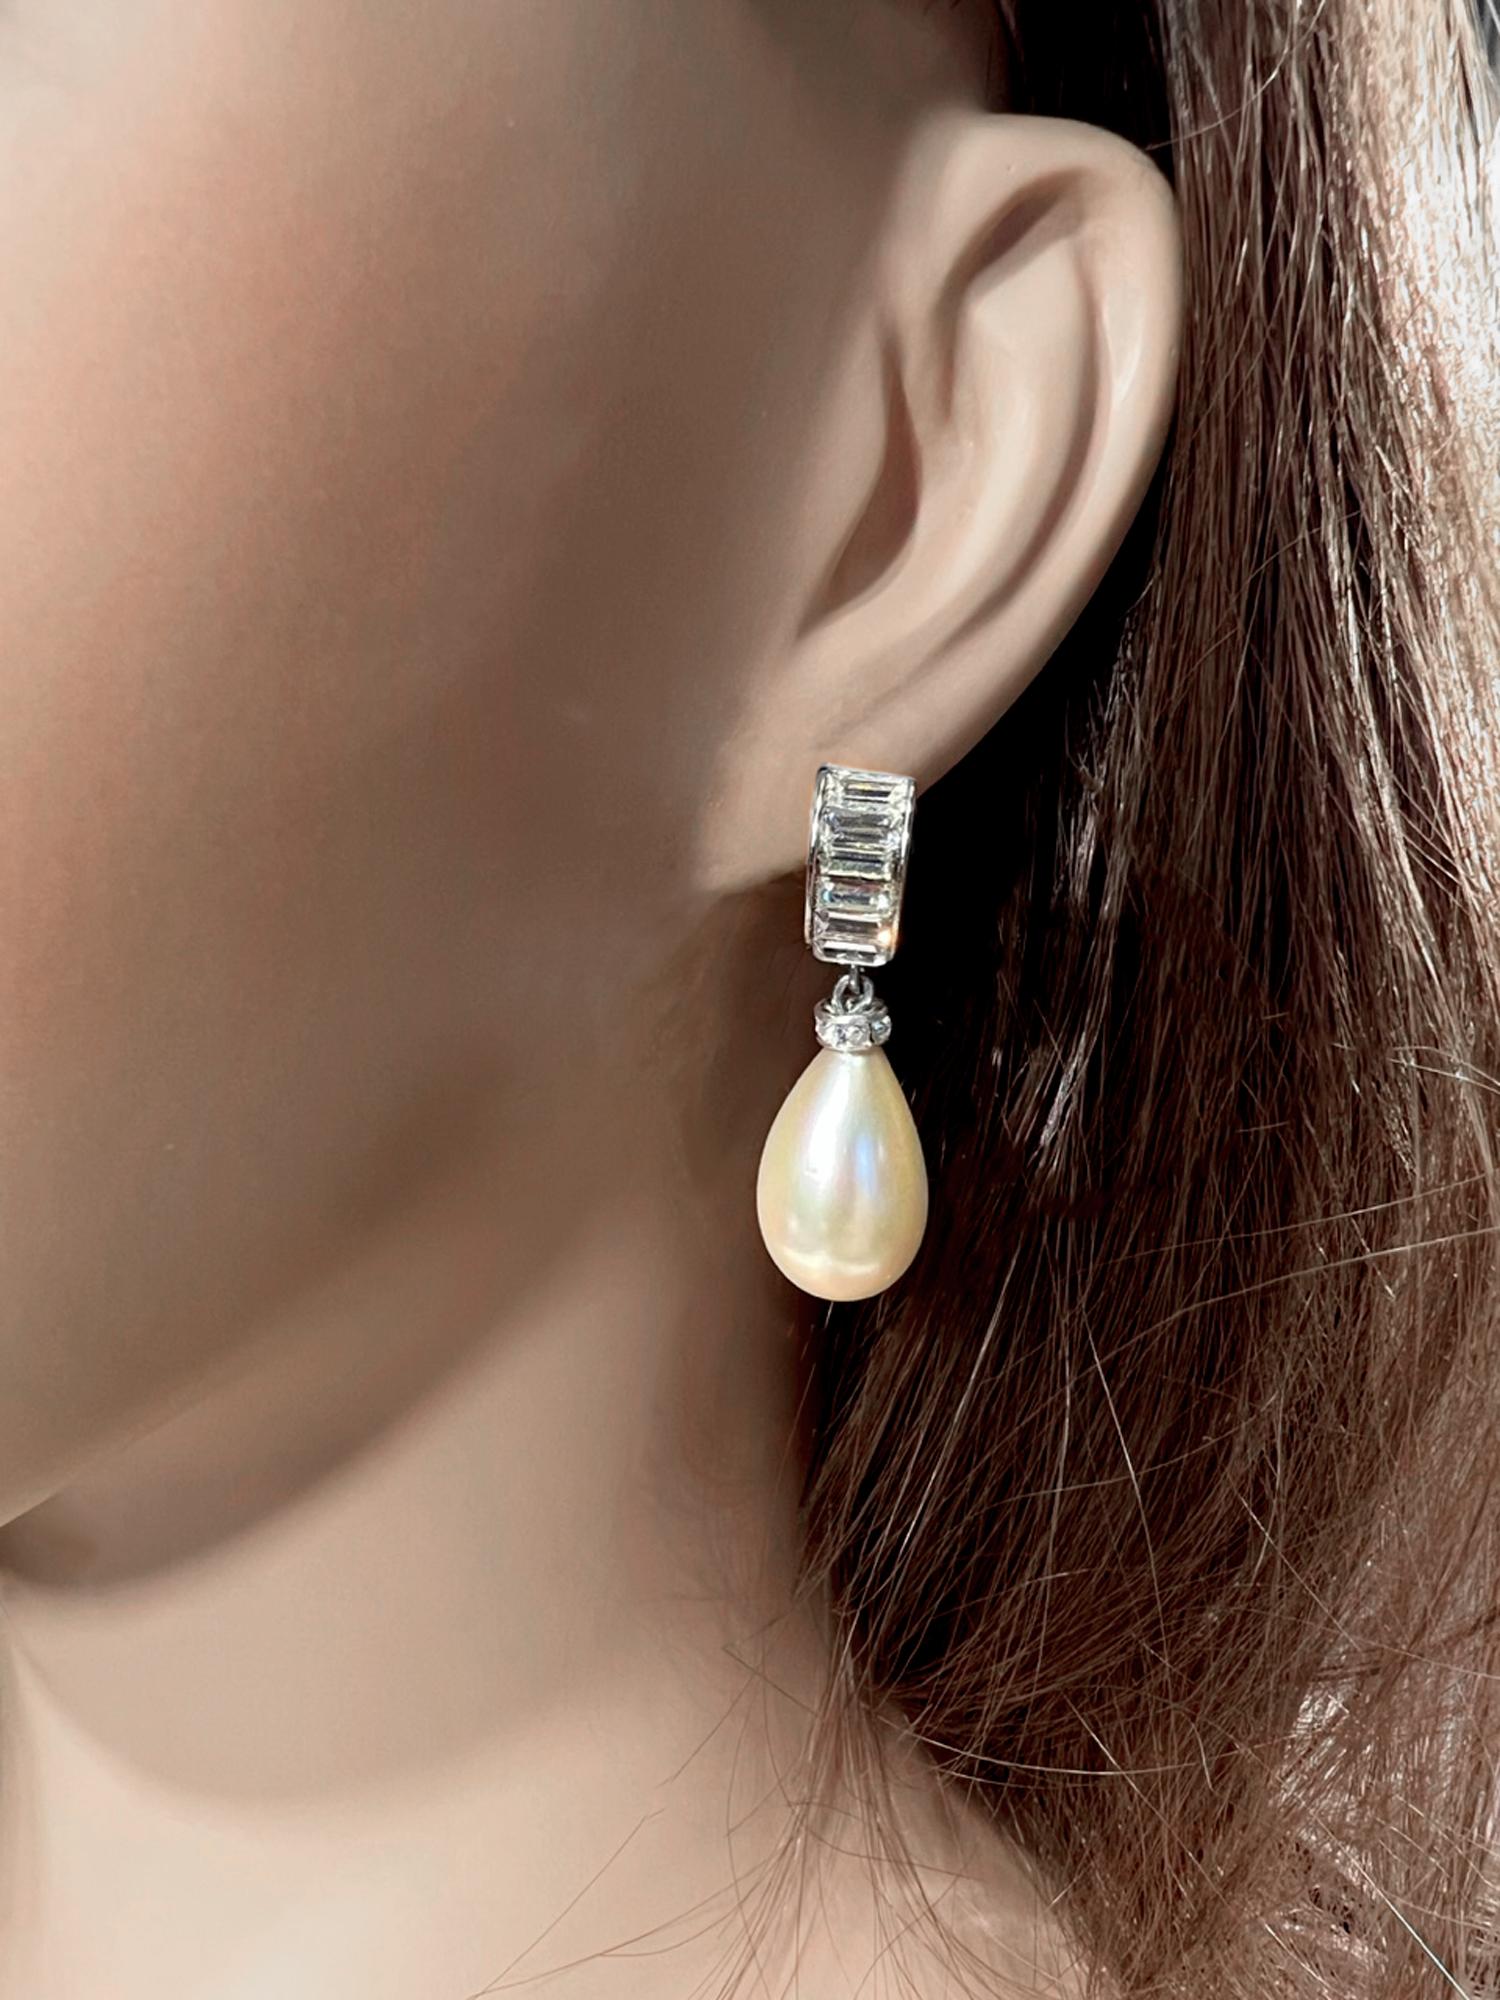 Vintage Baguette Swarovski Diamanté Huggie Rhodium Pearl Drop Earrings Bridal Evening Wear
The perfect elegant, discrete diamond look is in a mint sparkly Diamanté  pearl dangly ear clip—half by a quarter inch and three quarter inch long of sparkly